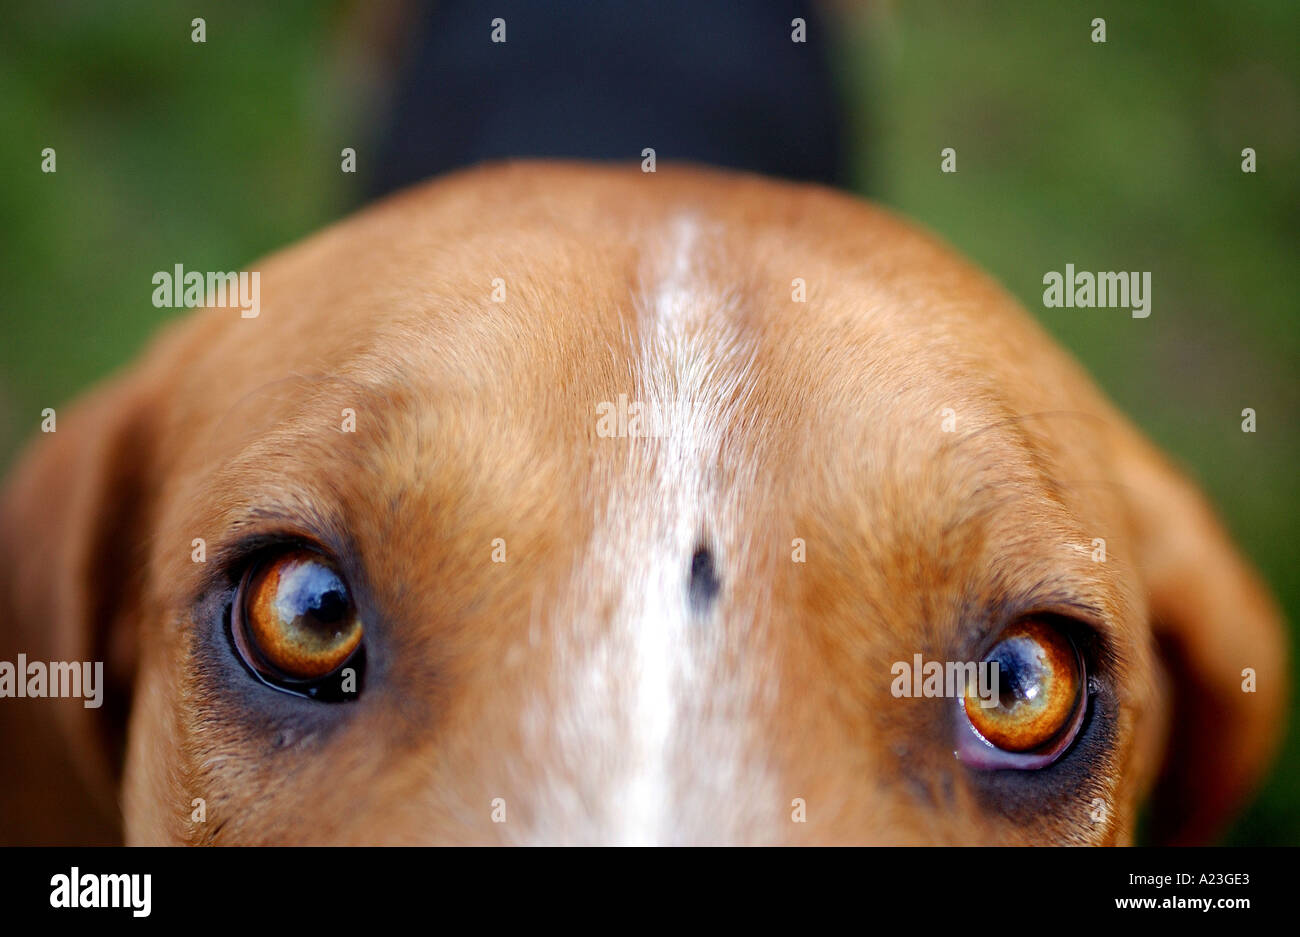 A hunting hound with piercing eyes looking into the camera at the Eggesford Hunt in North Devon, UK. Stock Photo